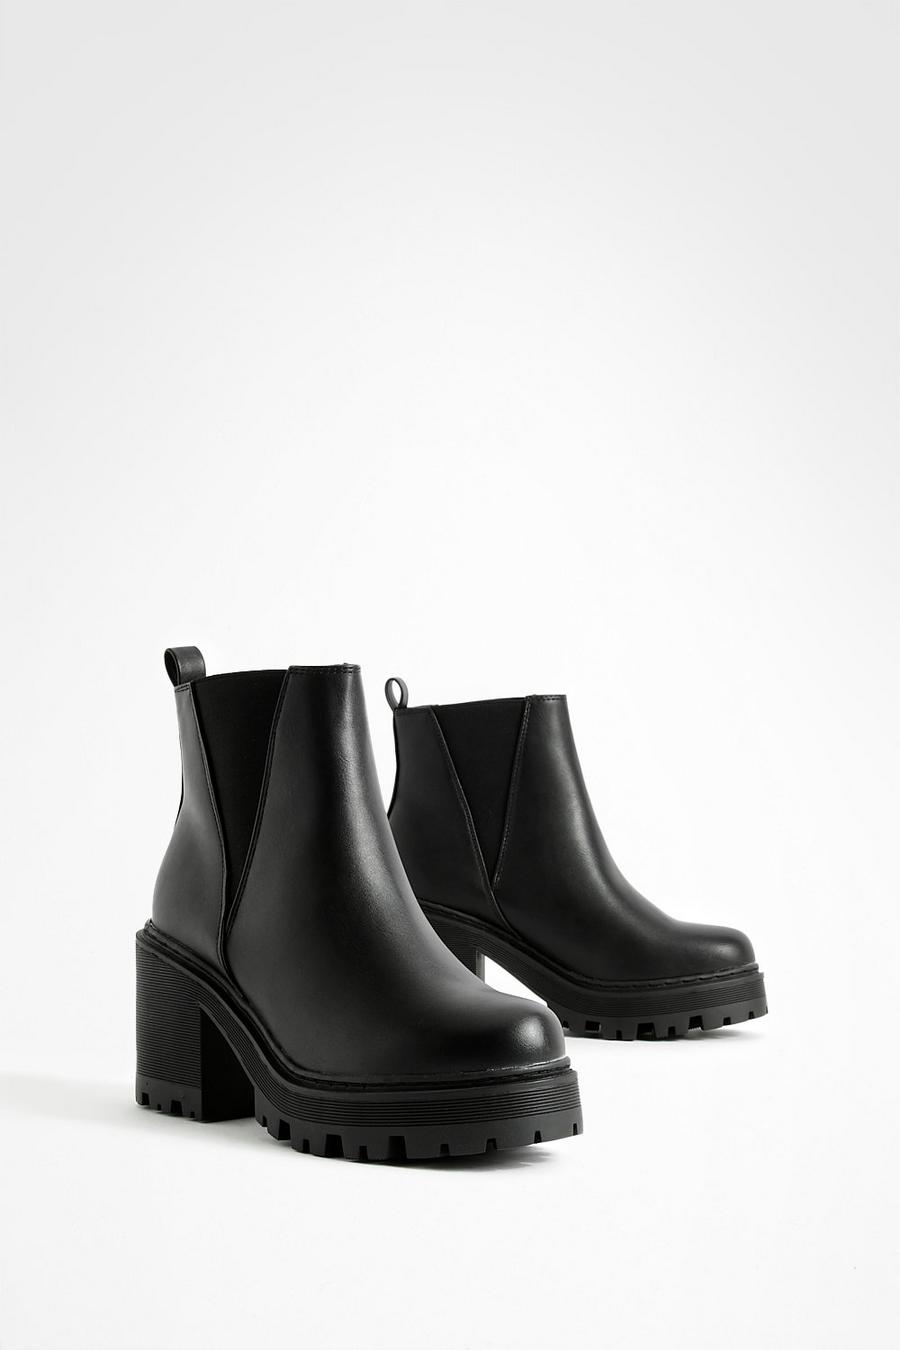 Høring raid syndrom Wide Fit Chunky Block Heel Chelsea Boots | Boohoo UK